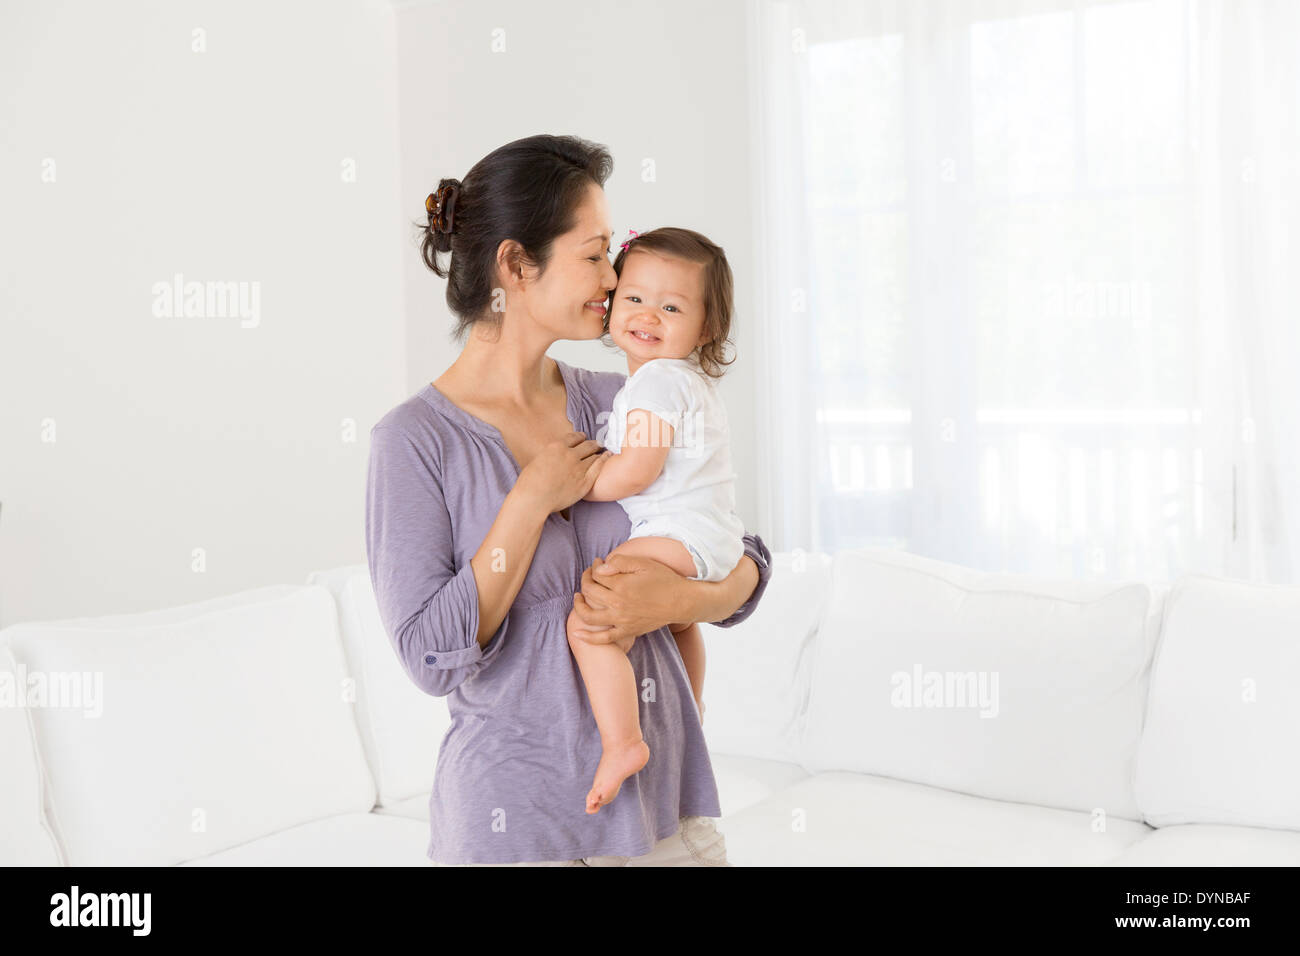 Mother holding baby girl in living room Banque D'Images